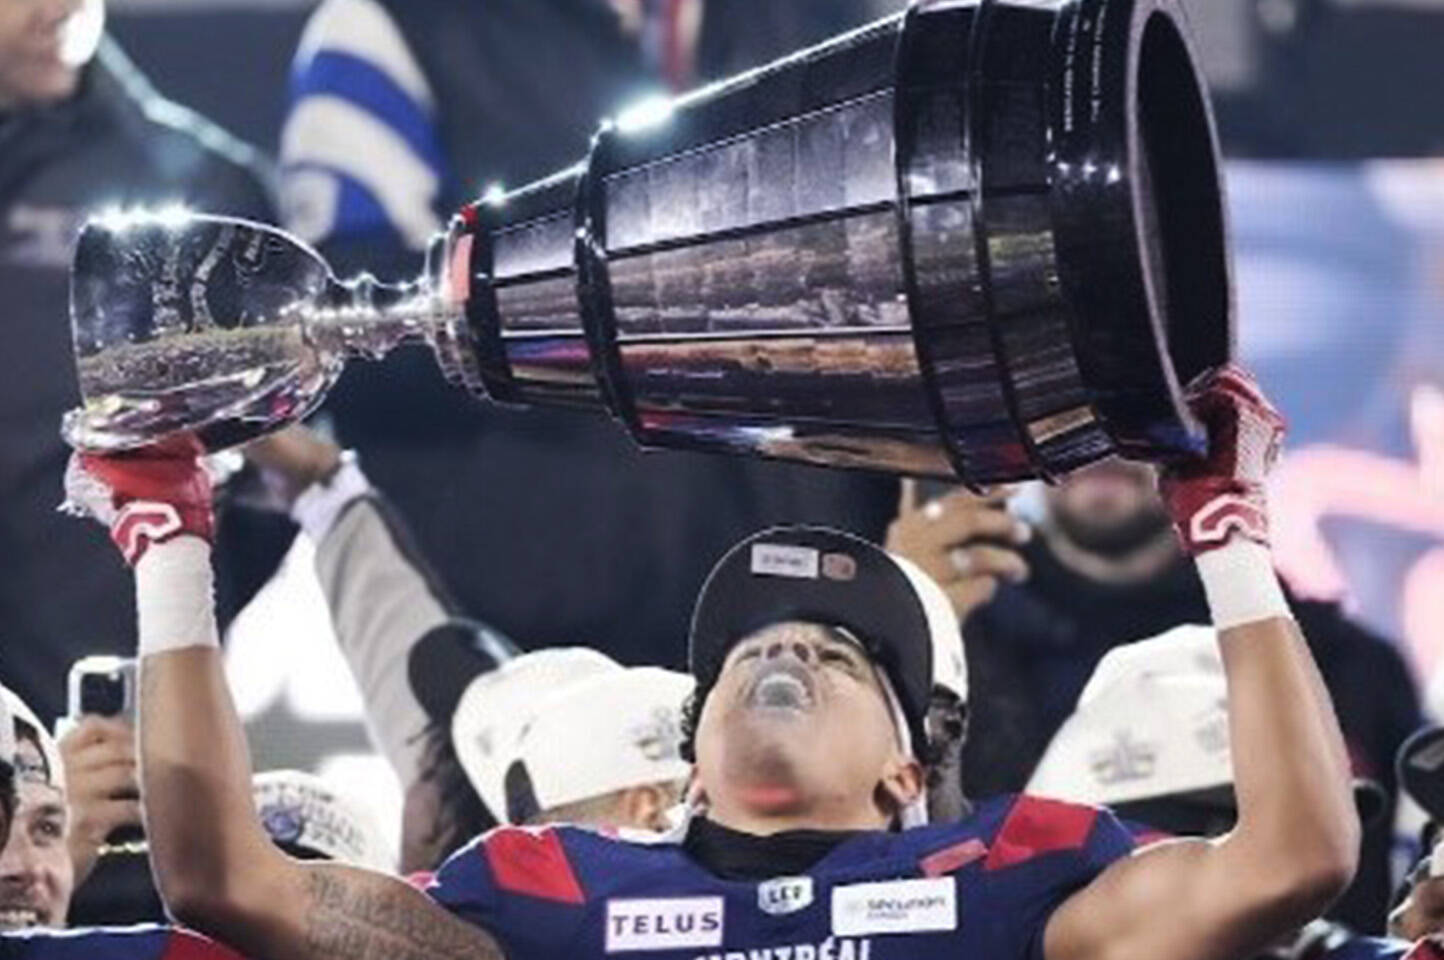 Seaquam Secondary product Tyson Philpot hoists the Grey Cup after the Montreal Alouettes defeated the Winnipeg Blue Bombers 28-24 in Hamilton on Sunday. courtesy CFL.ca